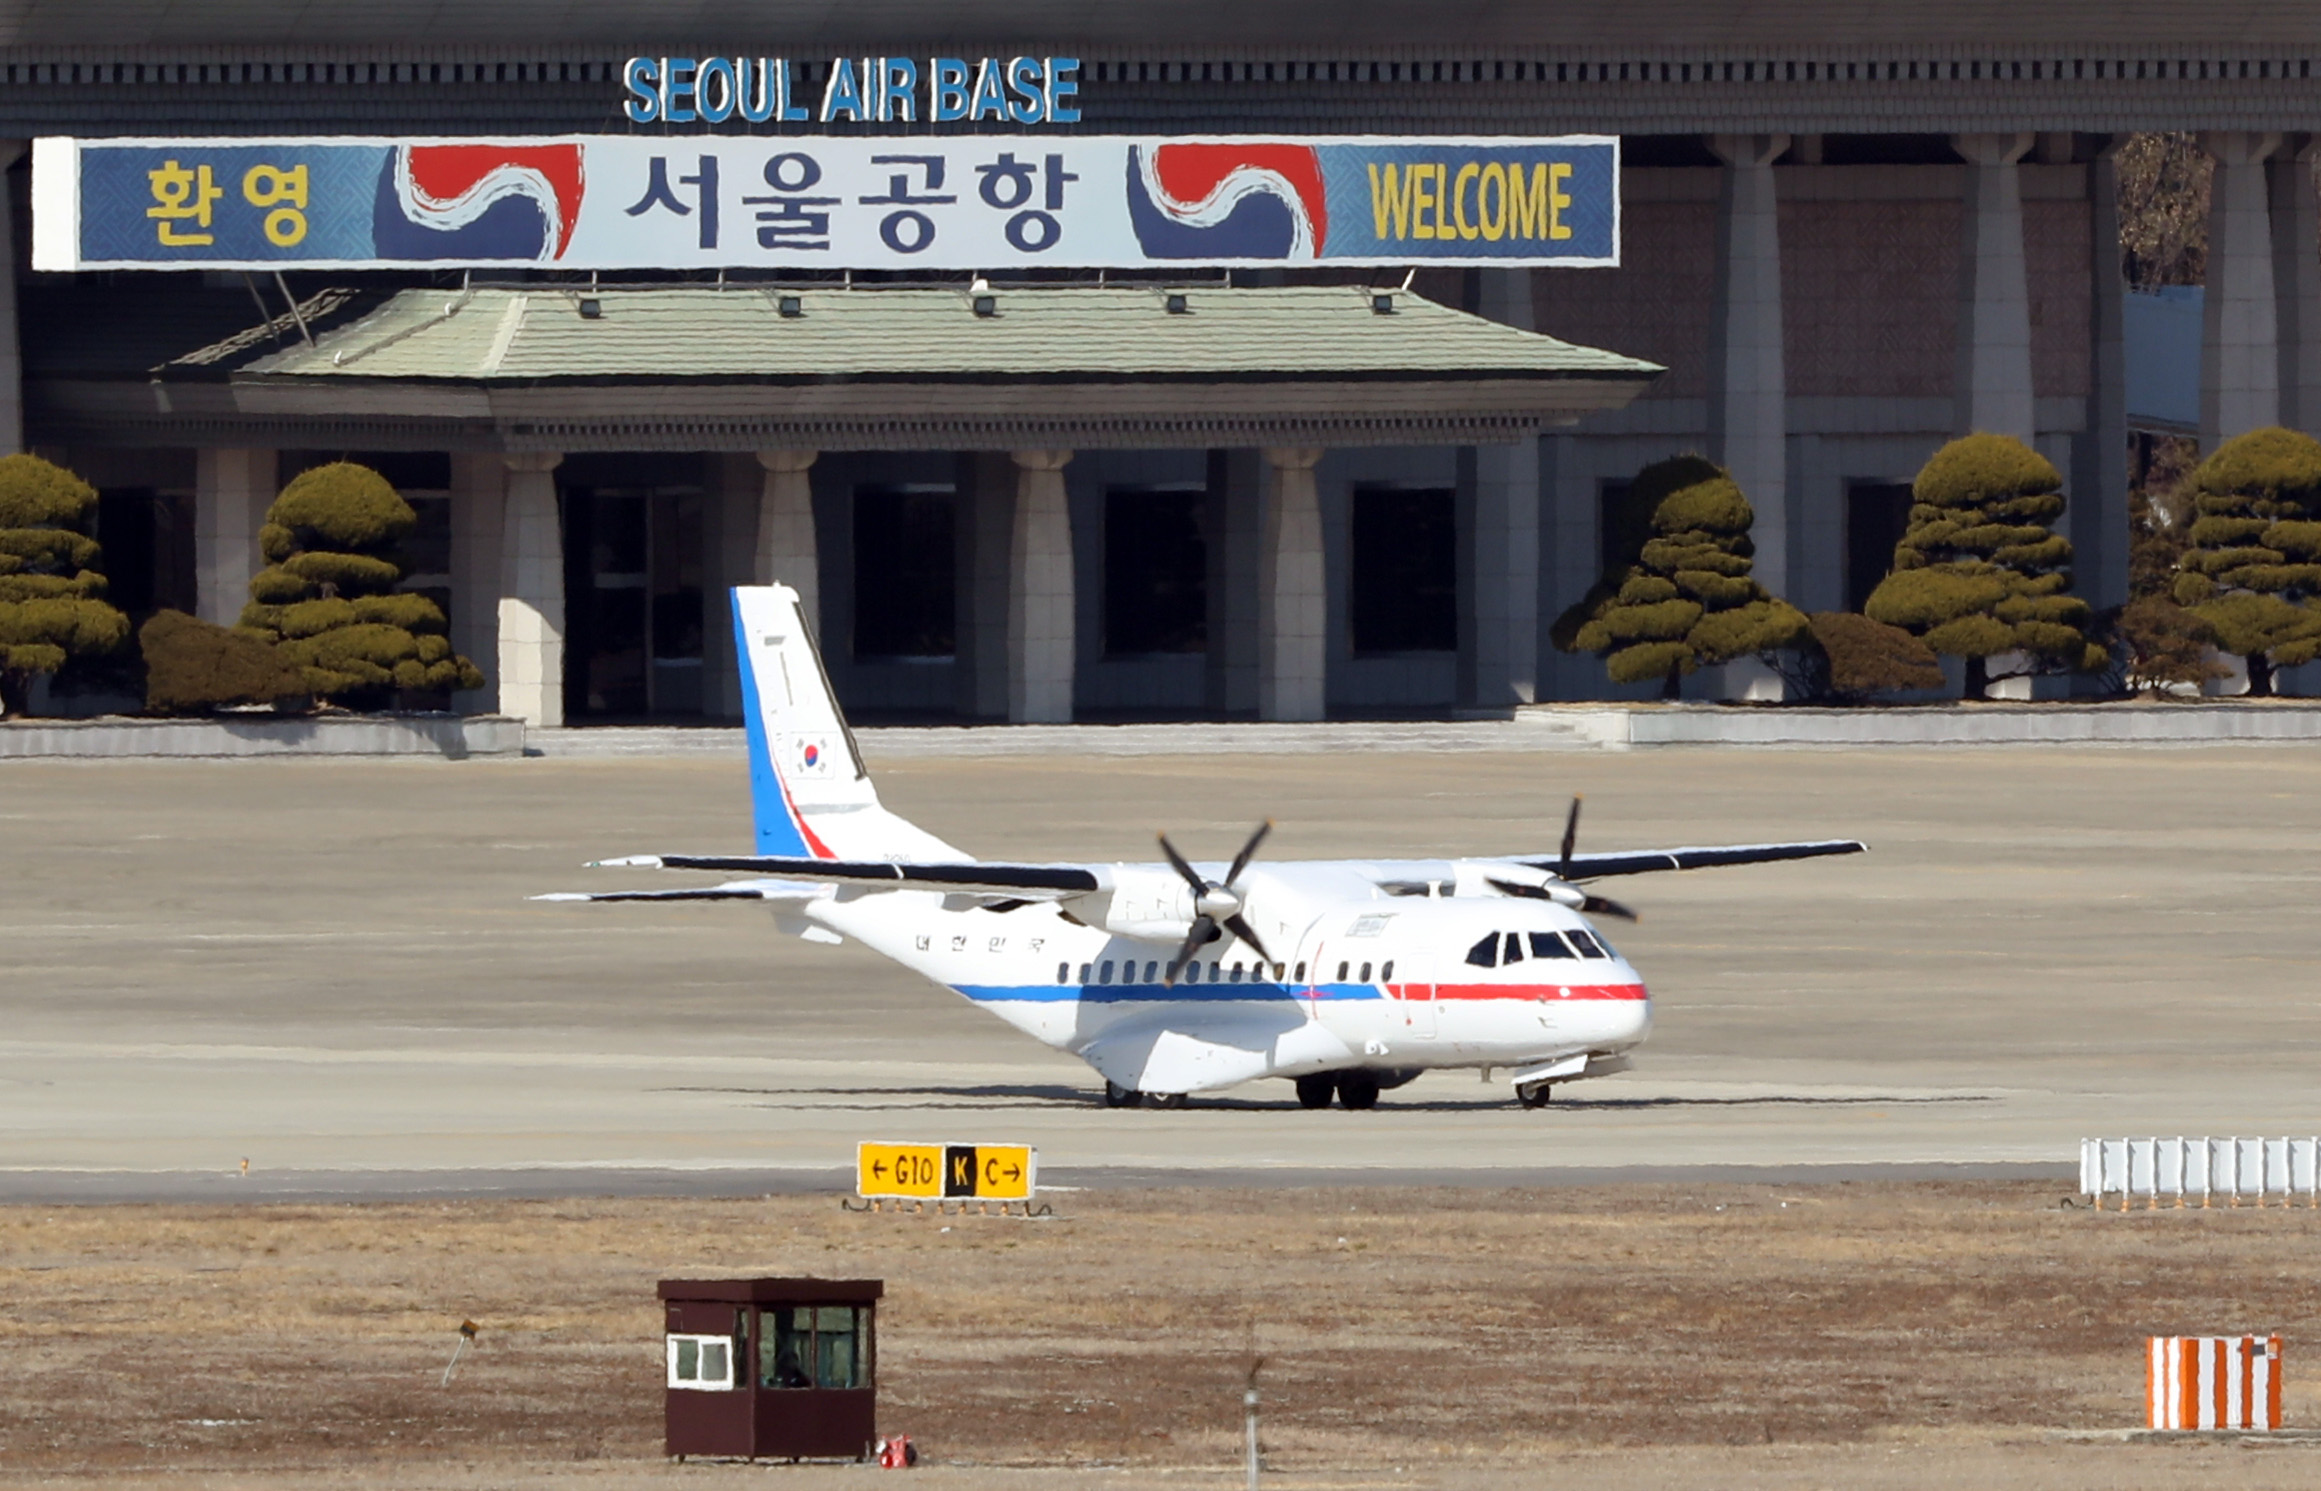 S. Korean presidential jet departs for Japan to evacuate 5 people from quarantined cruise ship